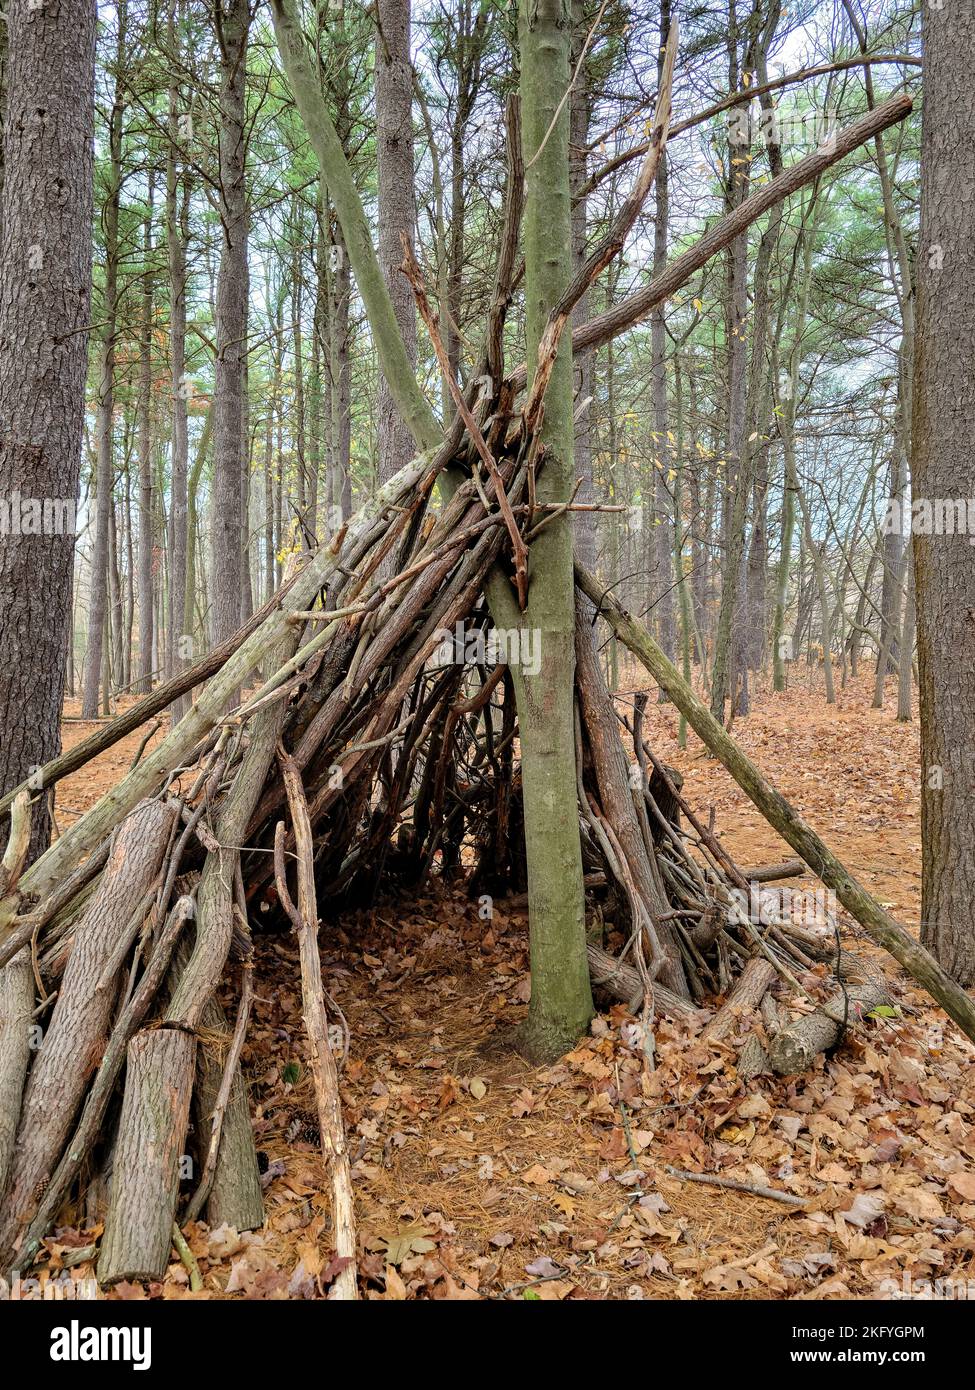 Manmade tree shelter in autumn woods Stock Photo